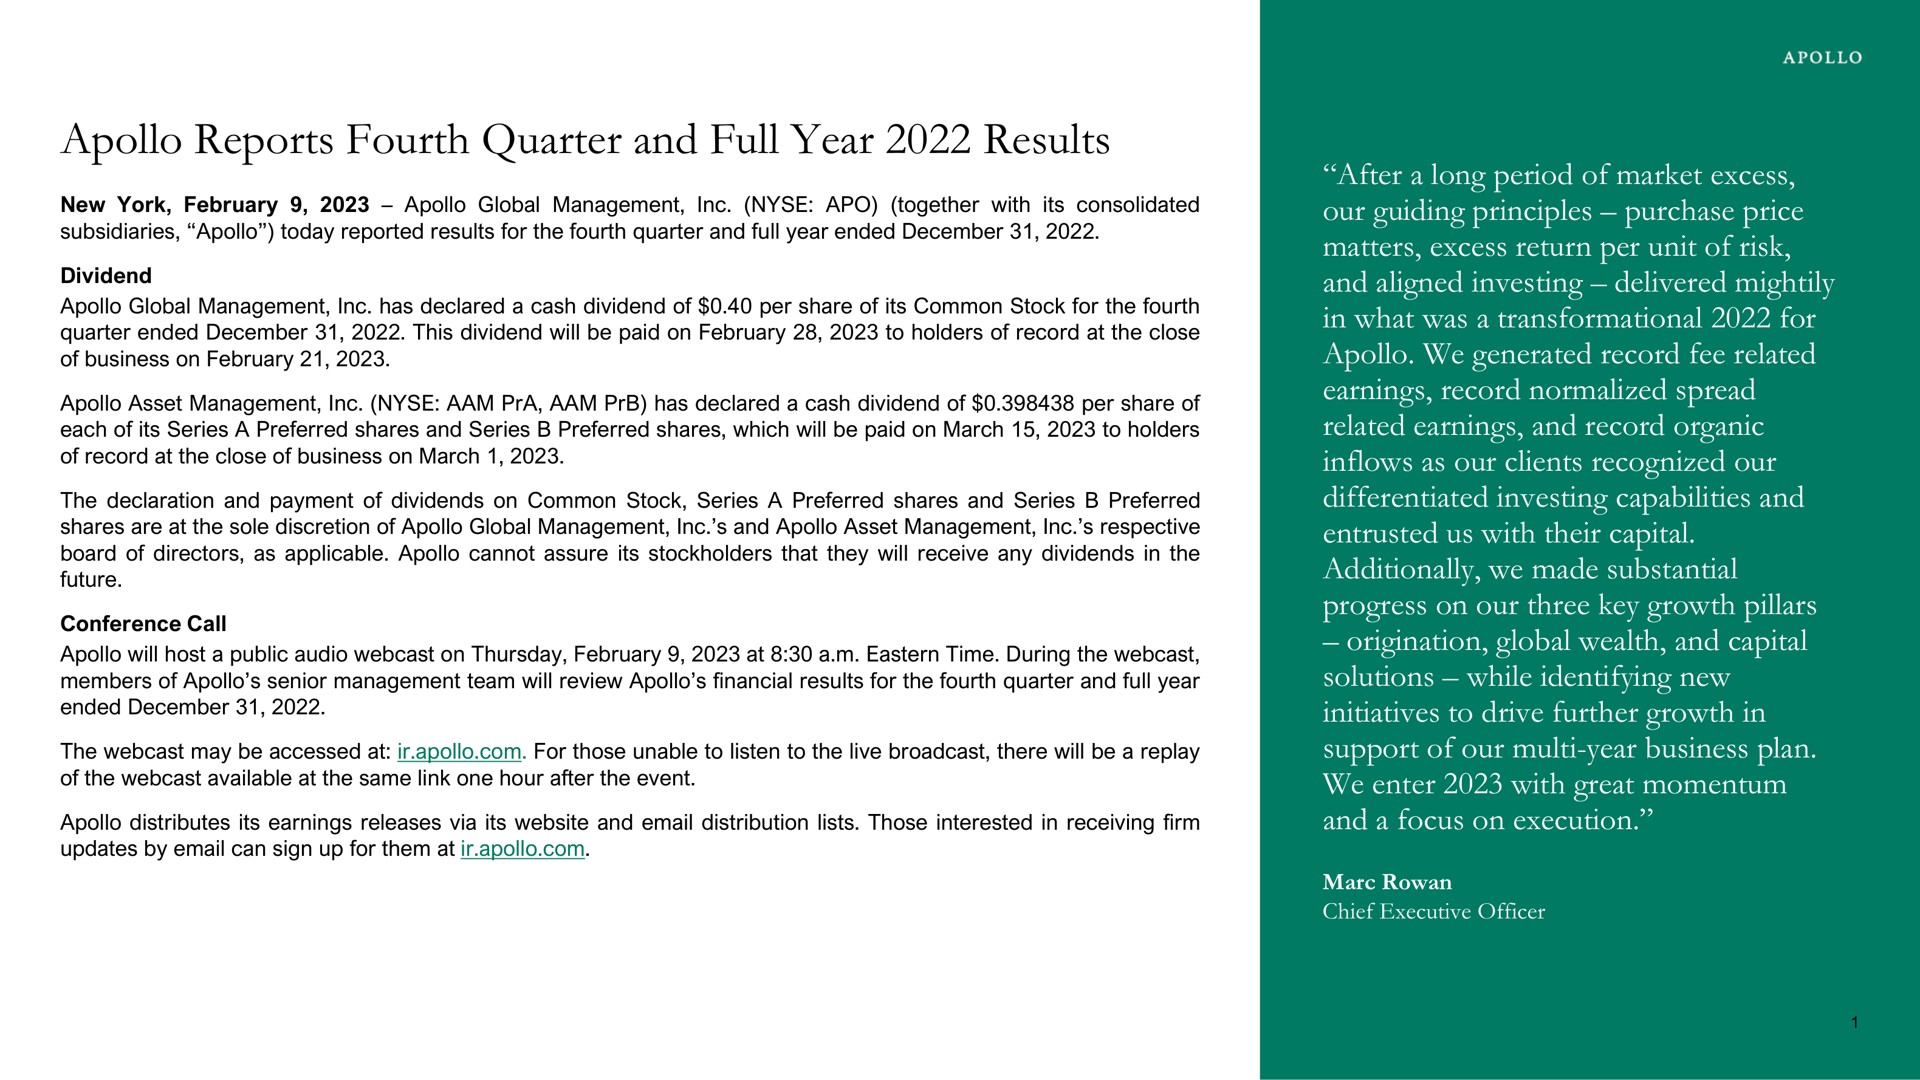 reports fourth quarter and full year results after a long period of market excess our guiding principles purchase price matters excess return per unit of risk and aligned investing delivered mightily in what was a for we generated record fee related earnings record normalized spread related earnings and record organic inflows as our clients recognized our differentiated investing capabilities and entrusted us with their capital additionally we made substantial progress on our three key growth pillars origination global wealth and capital solutions while identifying new initiatives to drive further growth in support of our year business plan we enter with great momentum and a focus on execution | Apollo Global Management